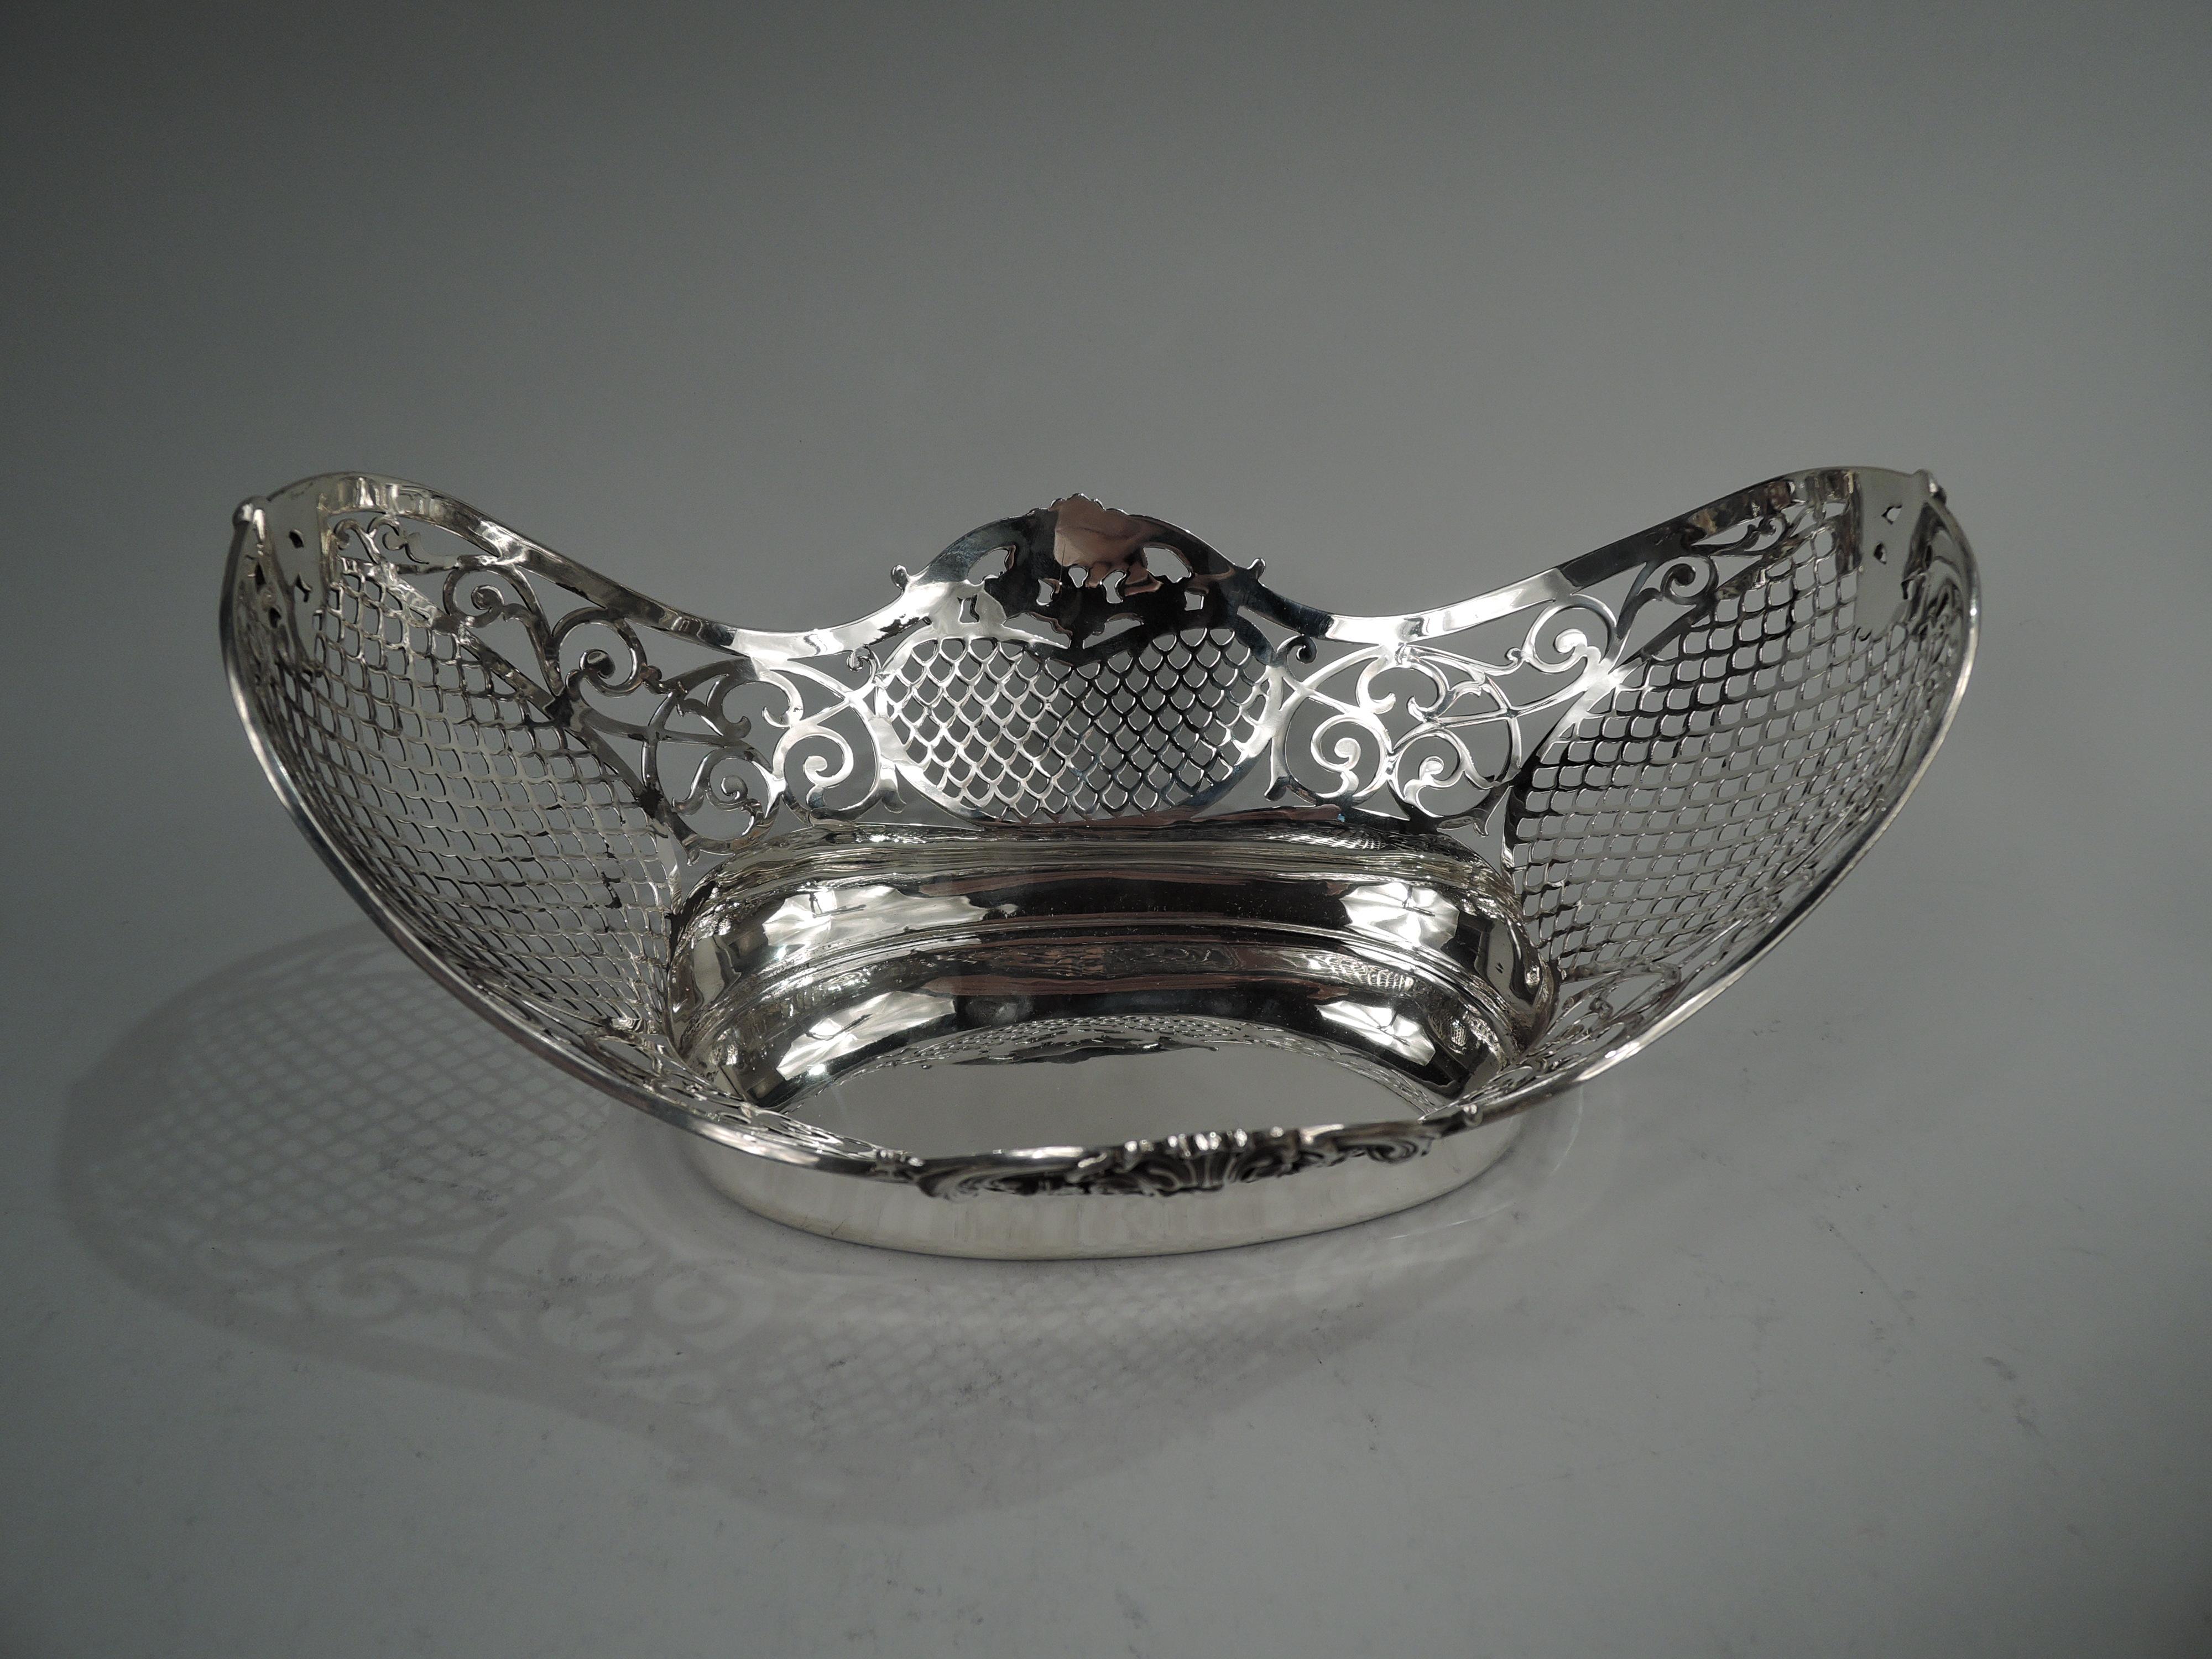 Edwardian Classical sterling silver bowl. Made by Gorham in Providence in 1906. Solid oval well and curved sides with pierced diaper and open leafing scrollwork. Rim reeded and steeply asymmetrical with applied shells, scrolls, and flowers. Fully